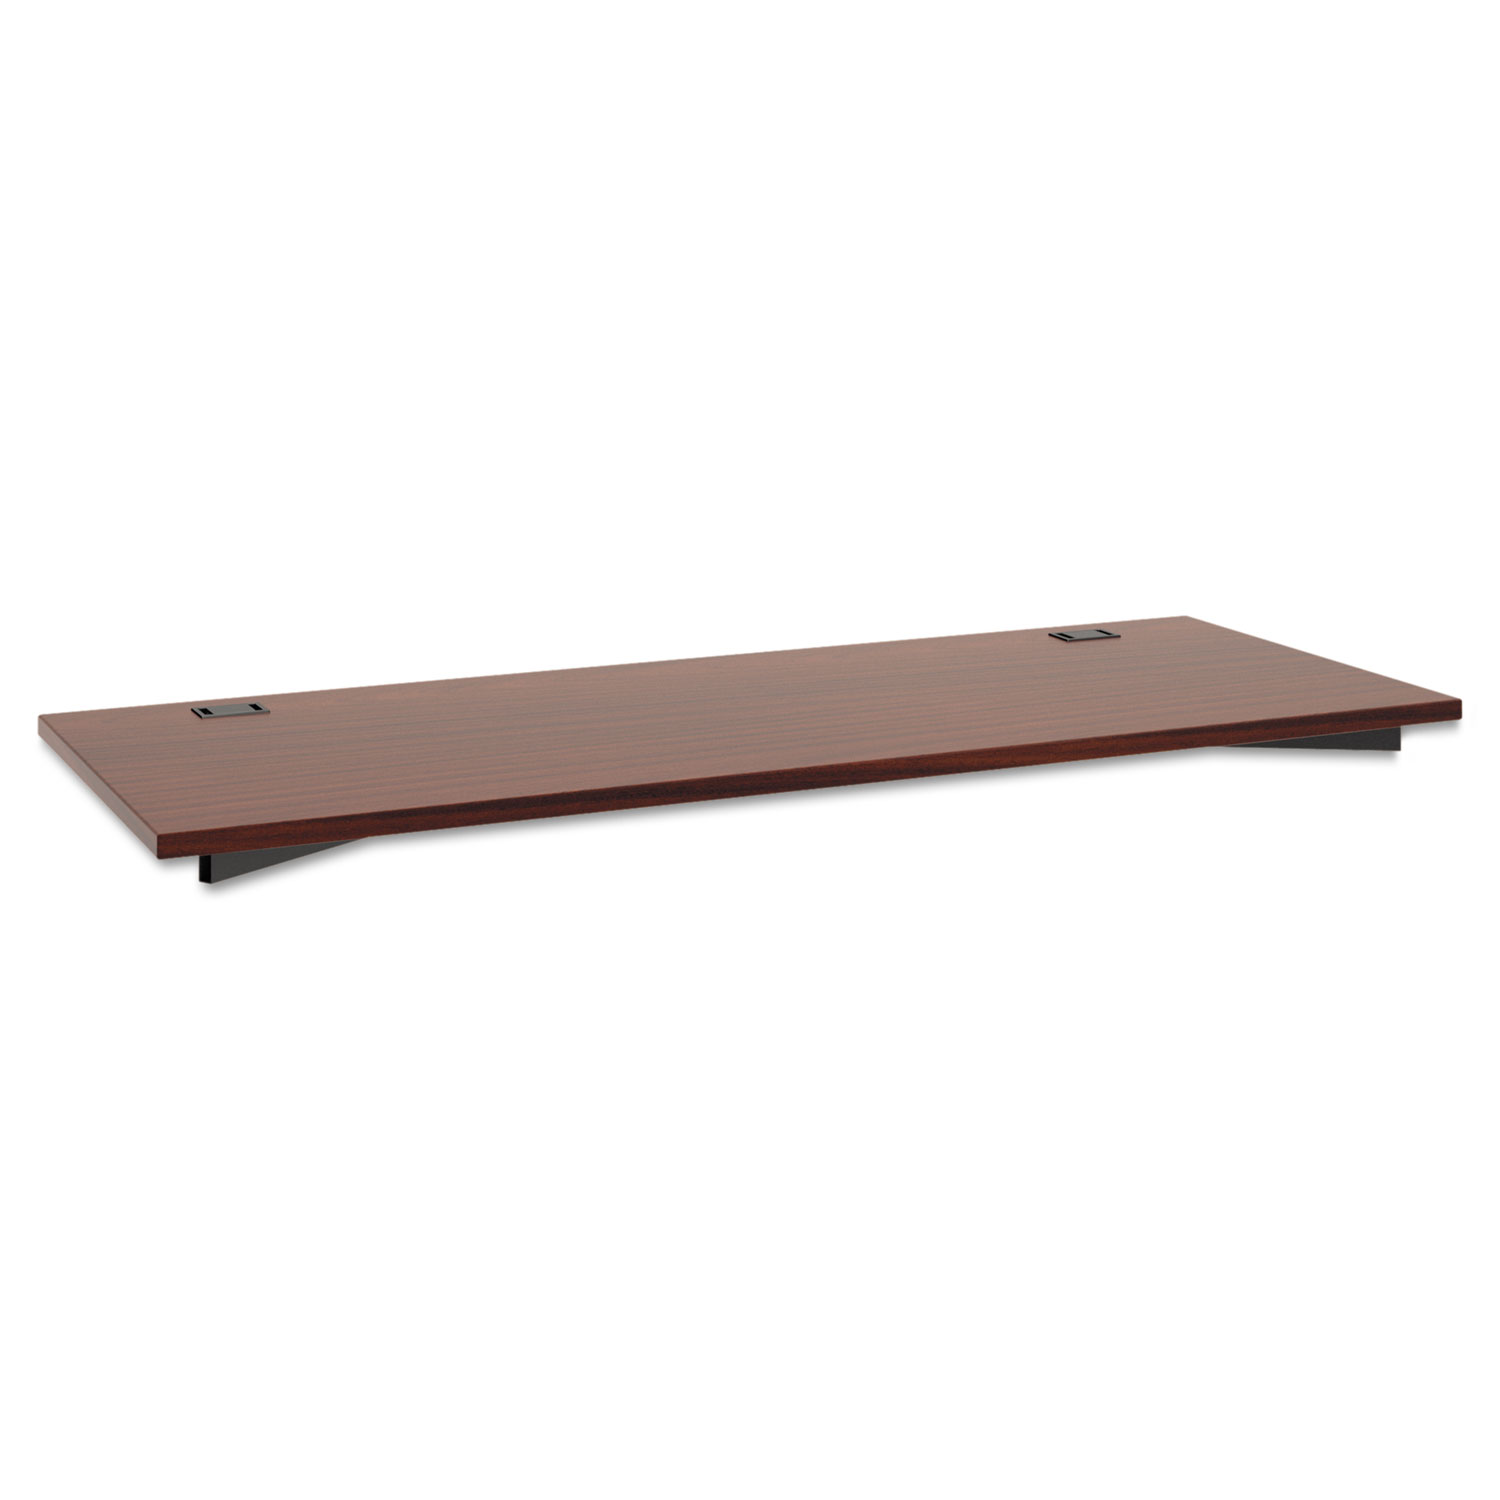 Manage Series Worksurface, Laminate, 60w x 23-1/2d x 1h, Chestnut